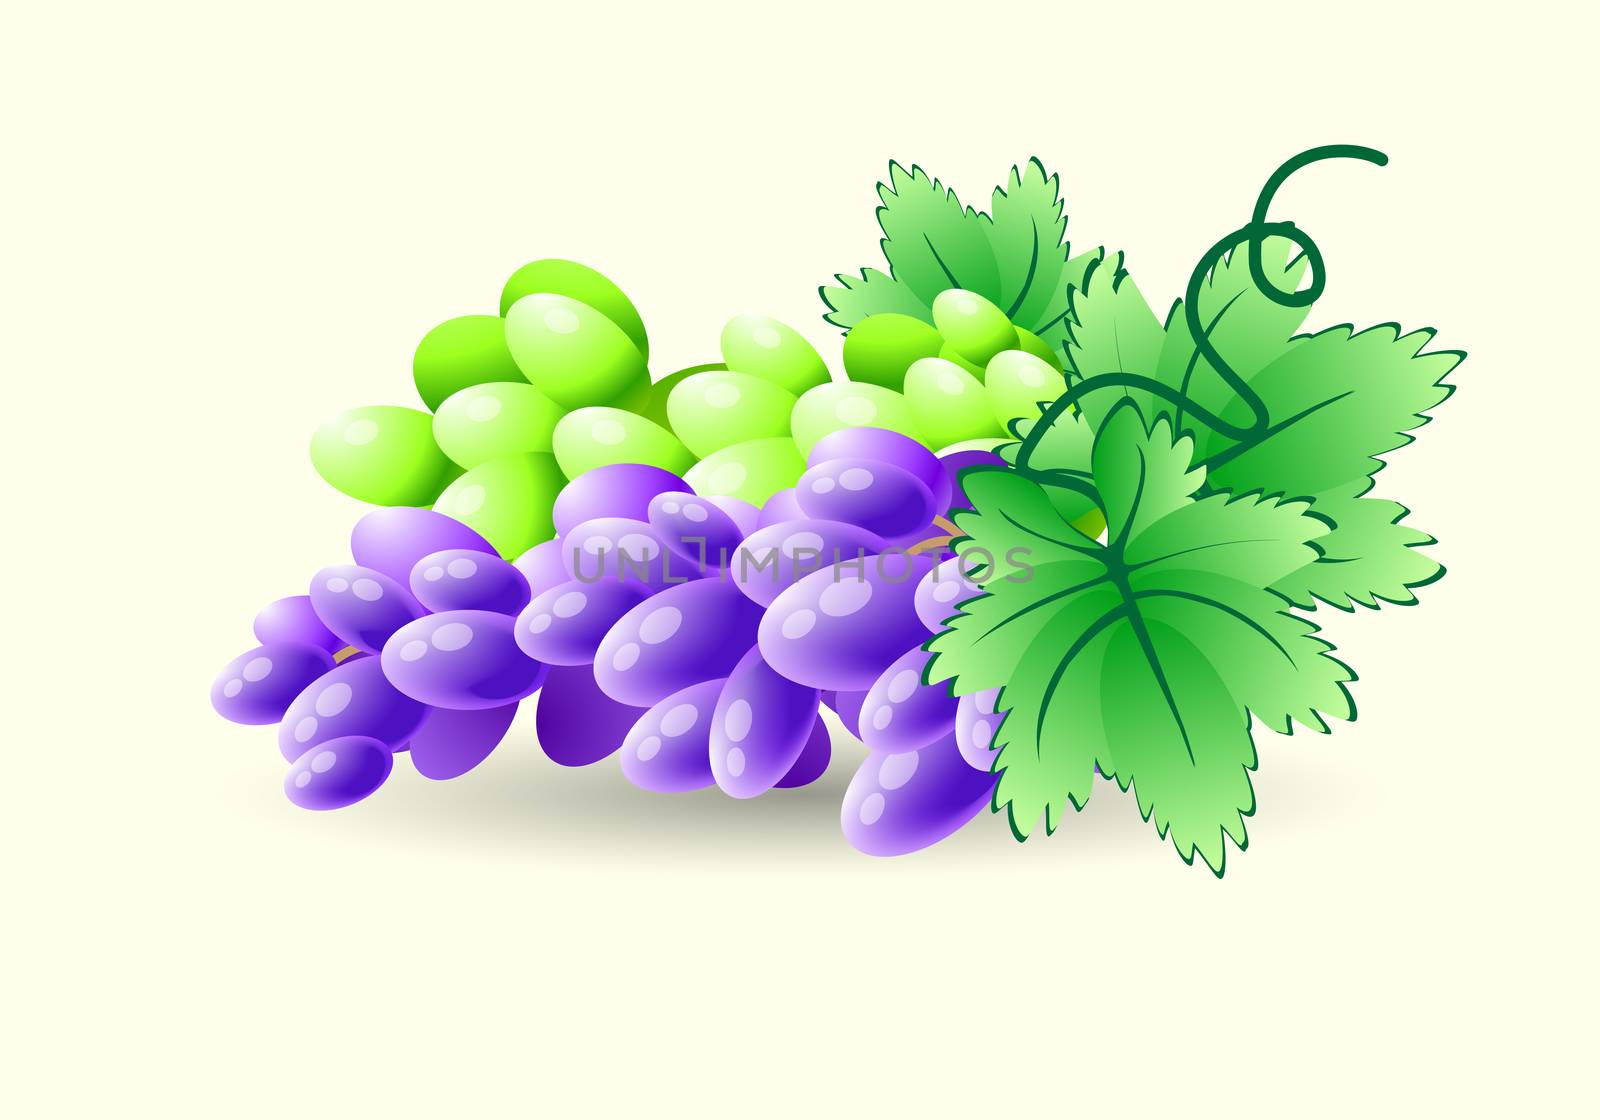 Green and blue grapes on a branch. illustration